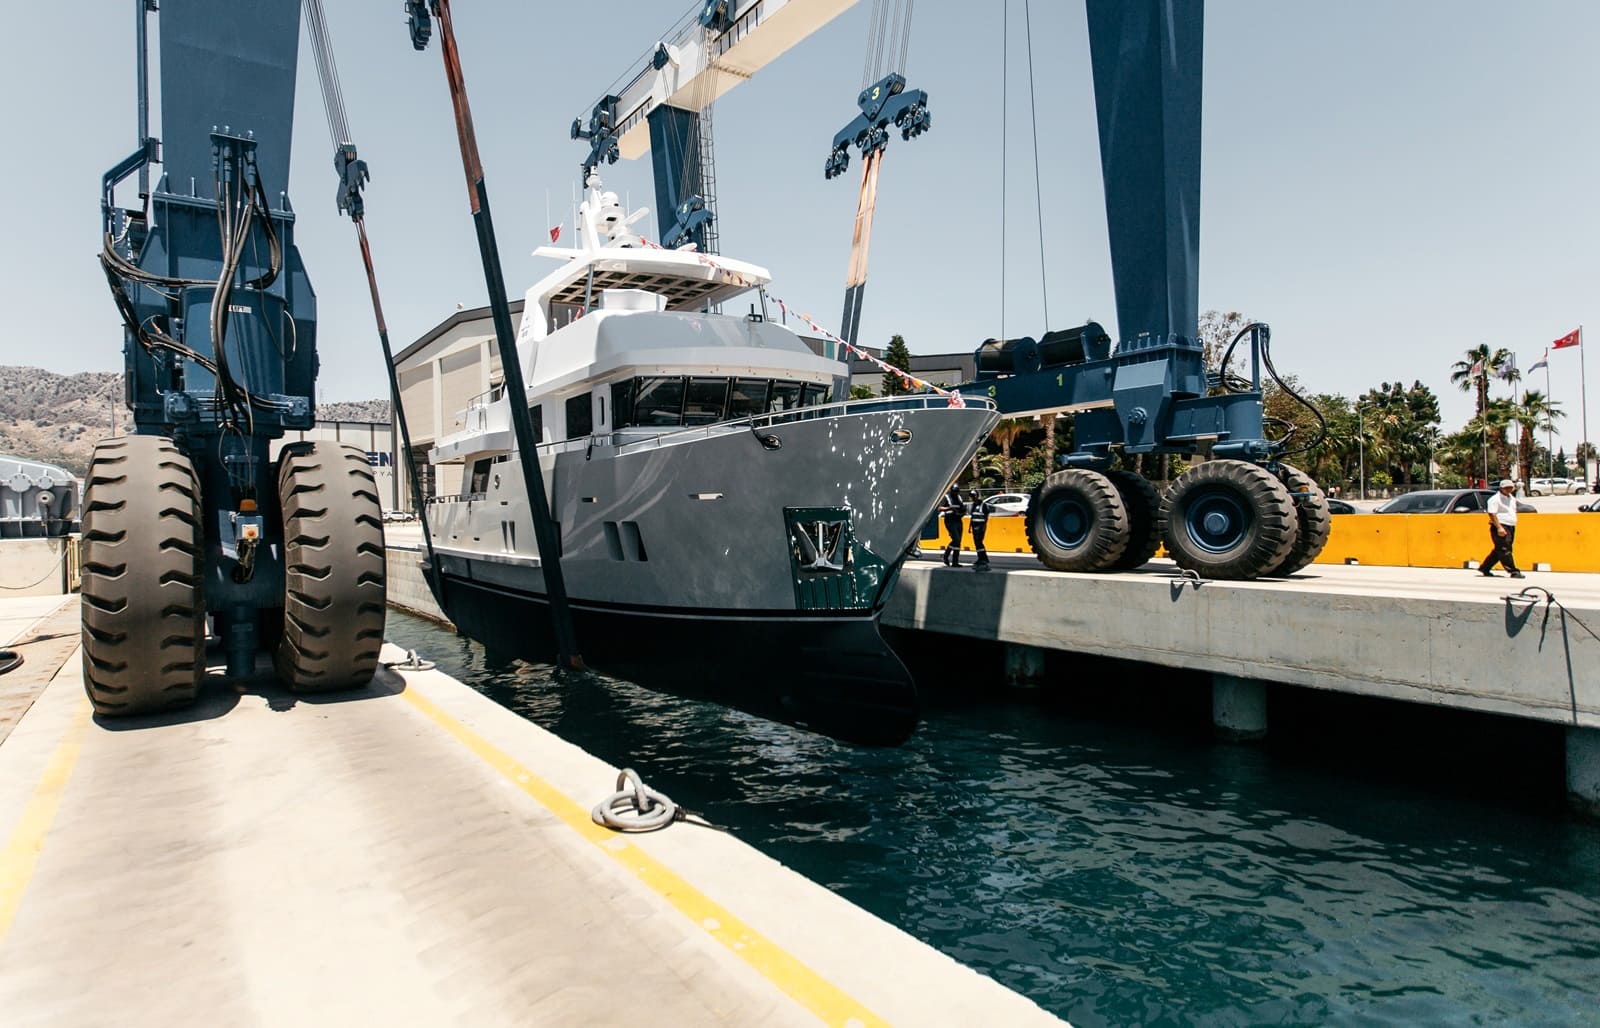 Bering Yachts Demonstrates Unmatched Versatility with Three New Launches